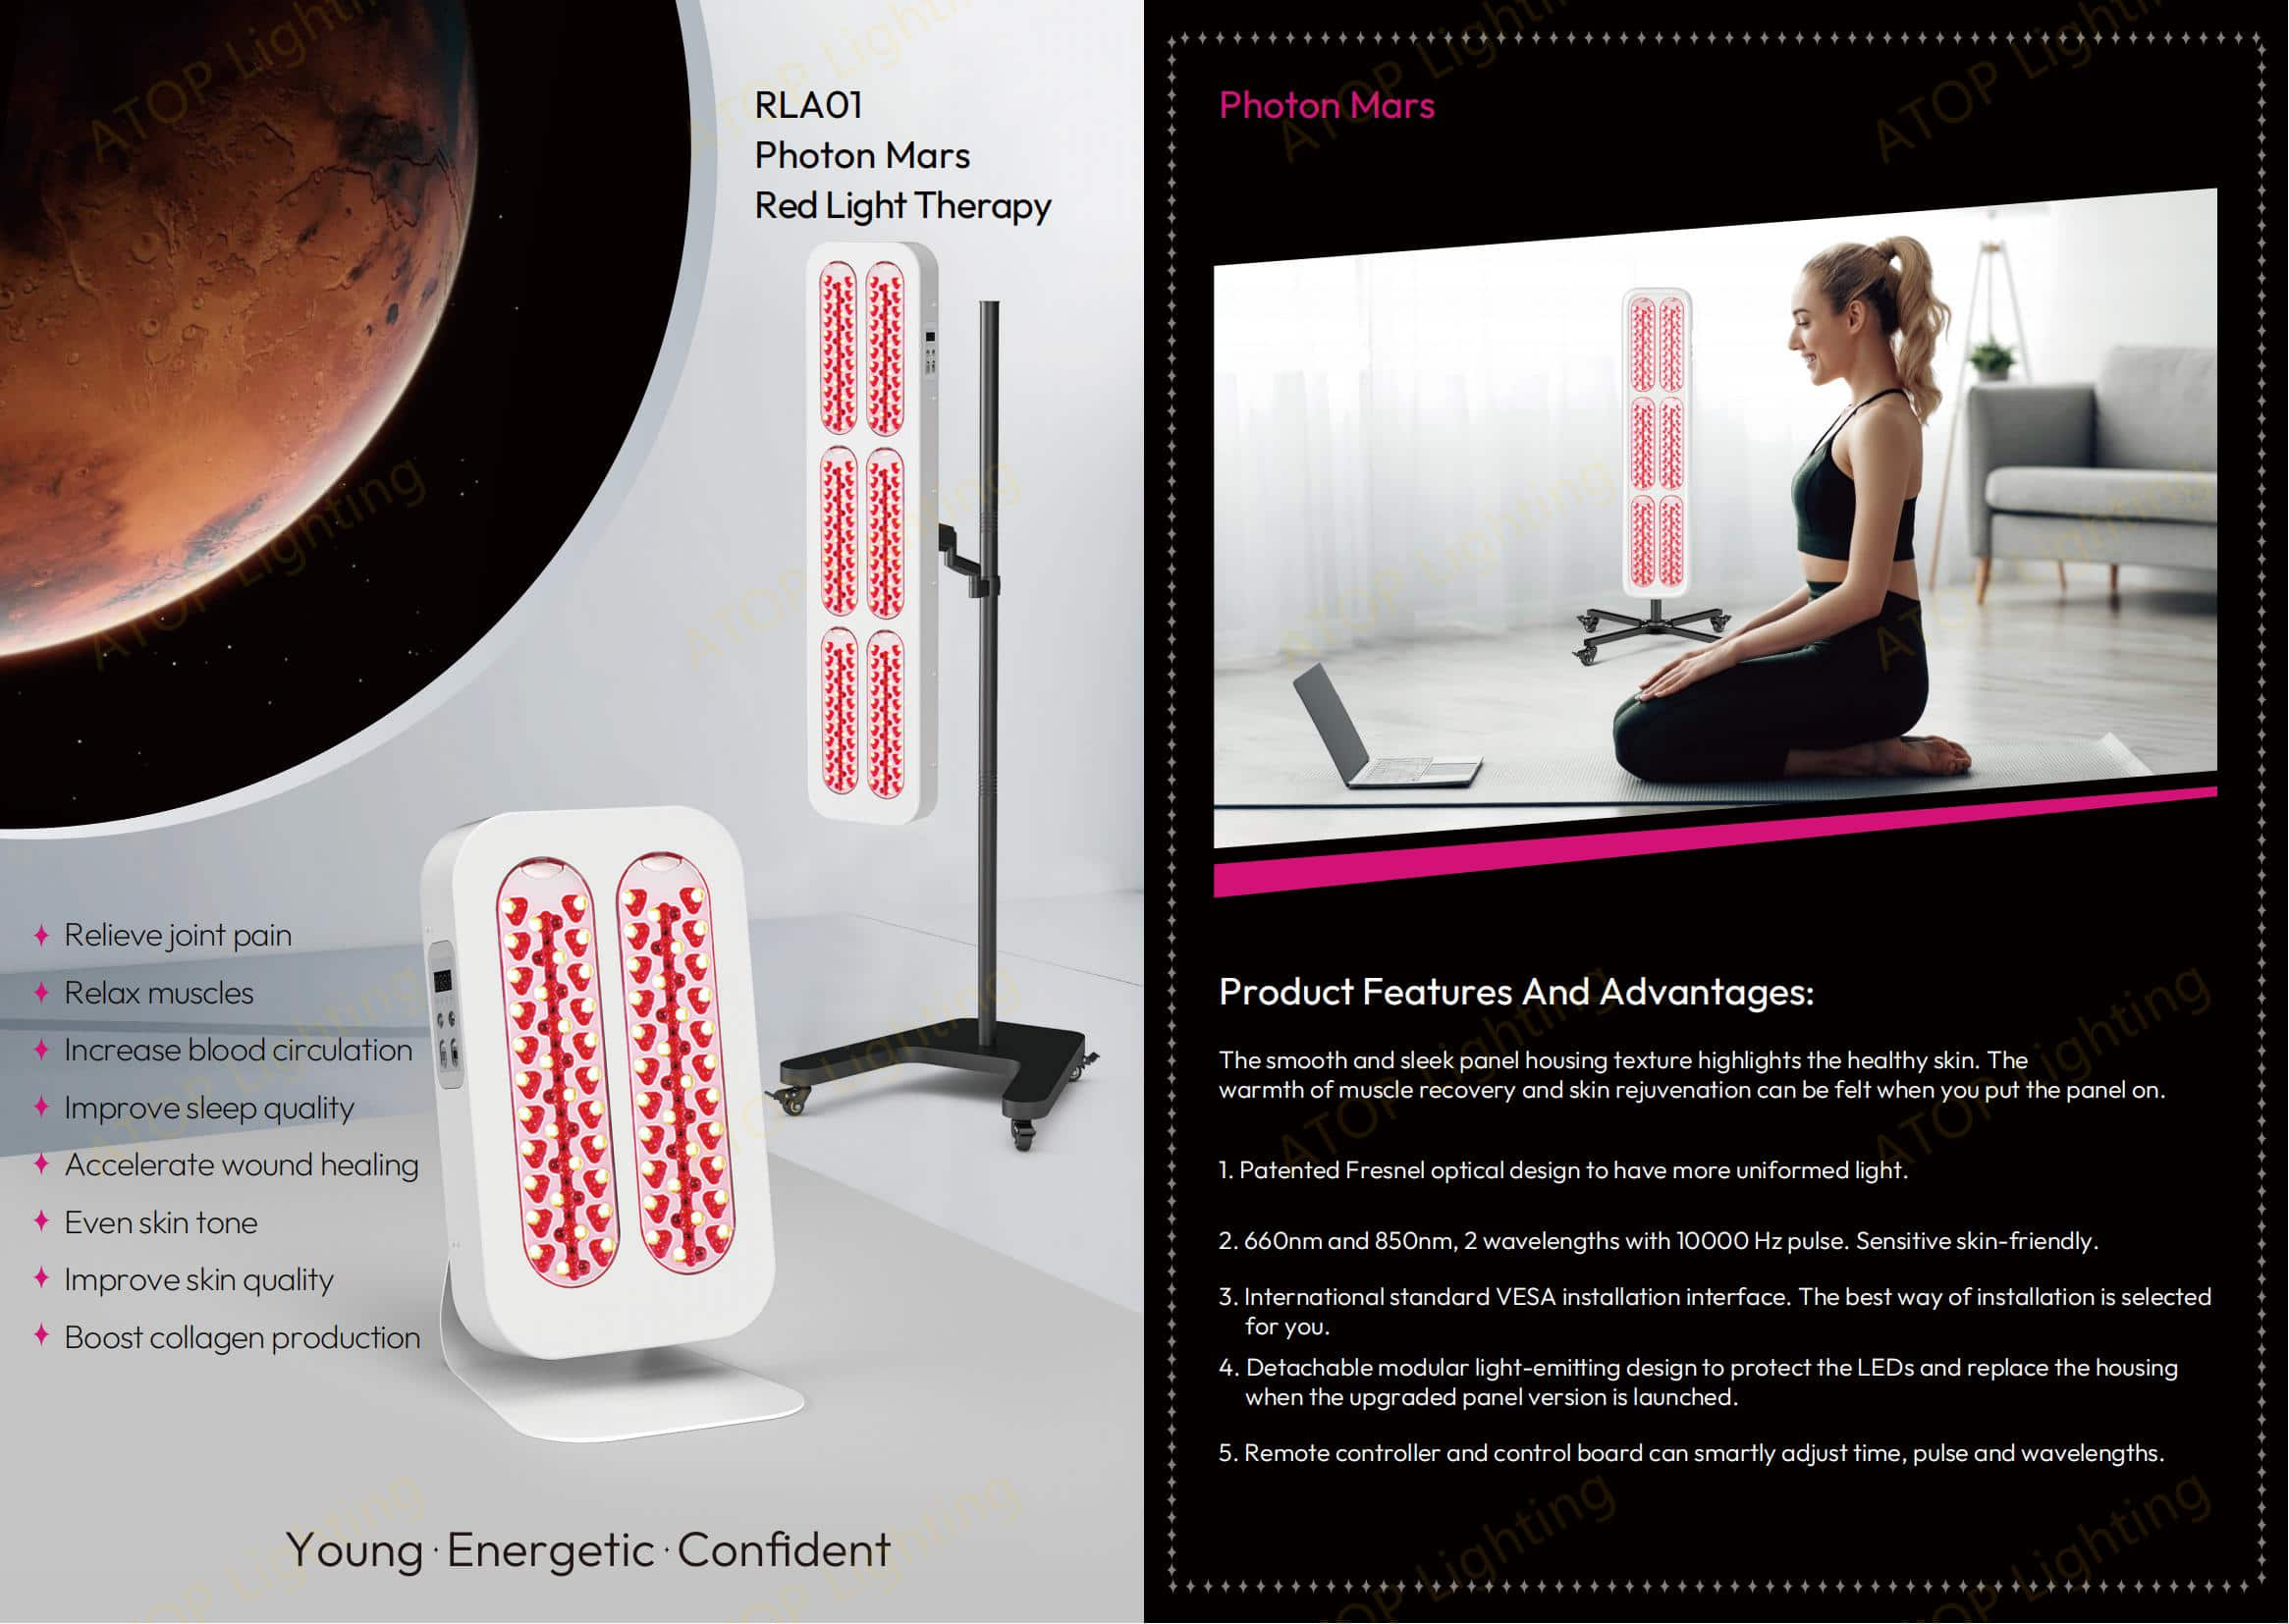 RLA01 Photon Mars Red Light Therapy